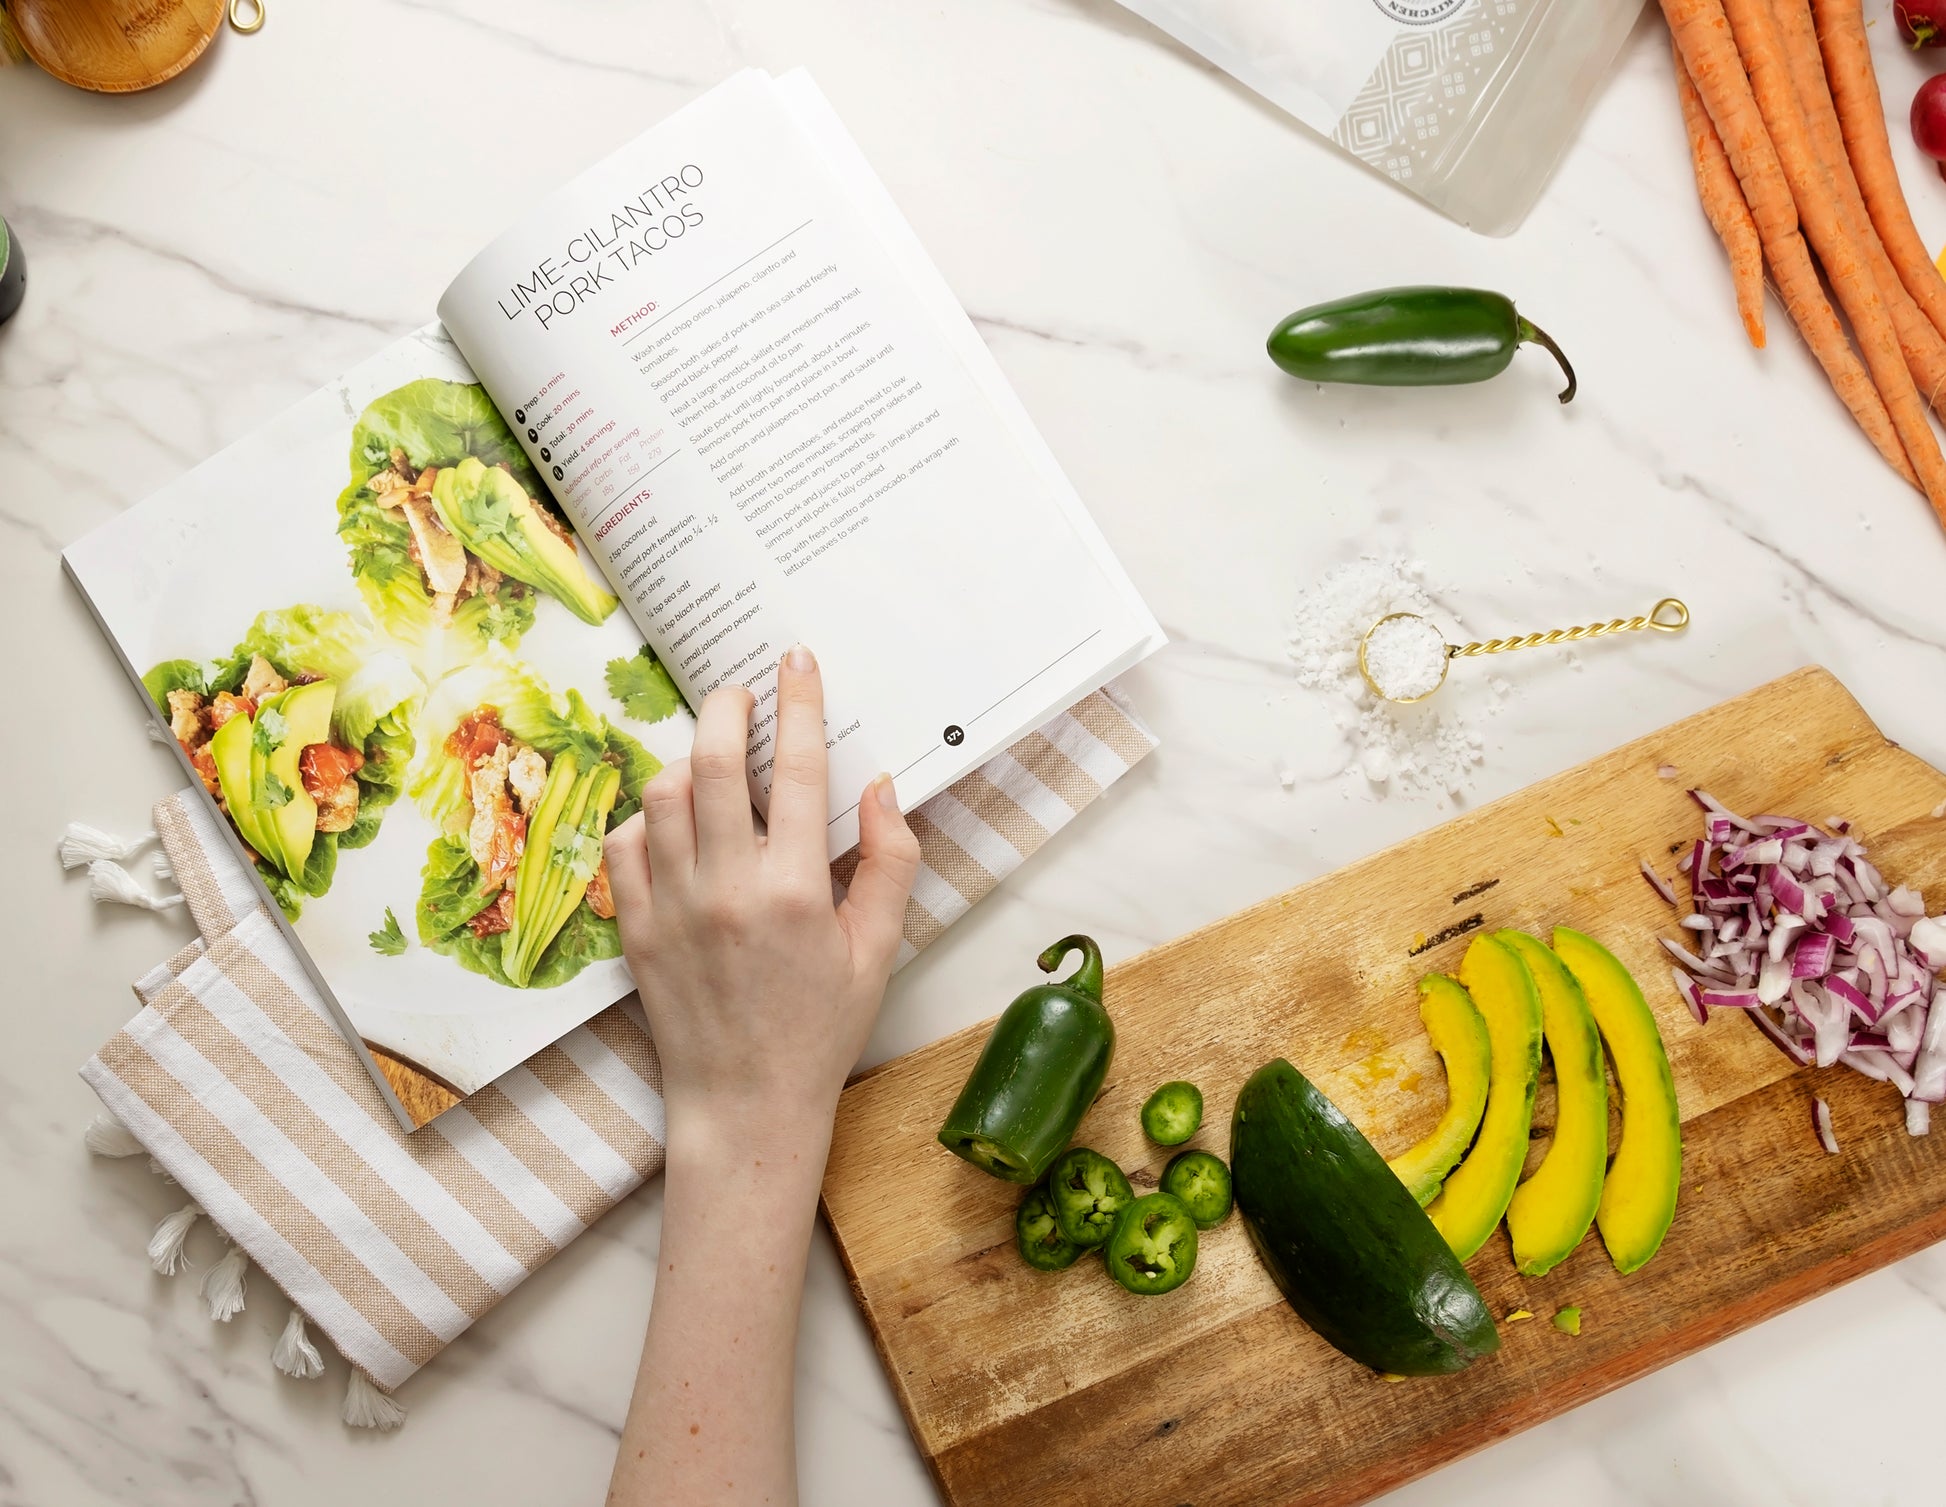 An opened Thyroid Rebook book on a kitchen cloth placed on a marble surface next to a wooden board with sliced vegetables. Measuring spoon, and some vegetables and also be seen.